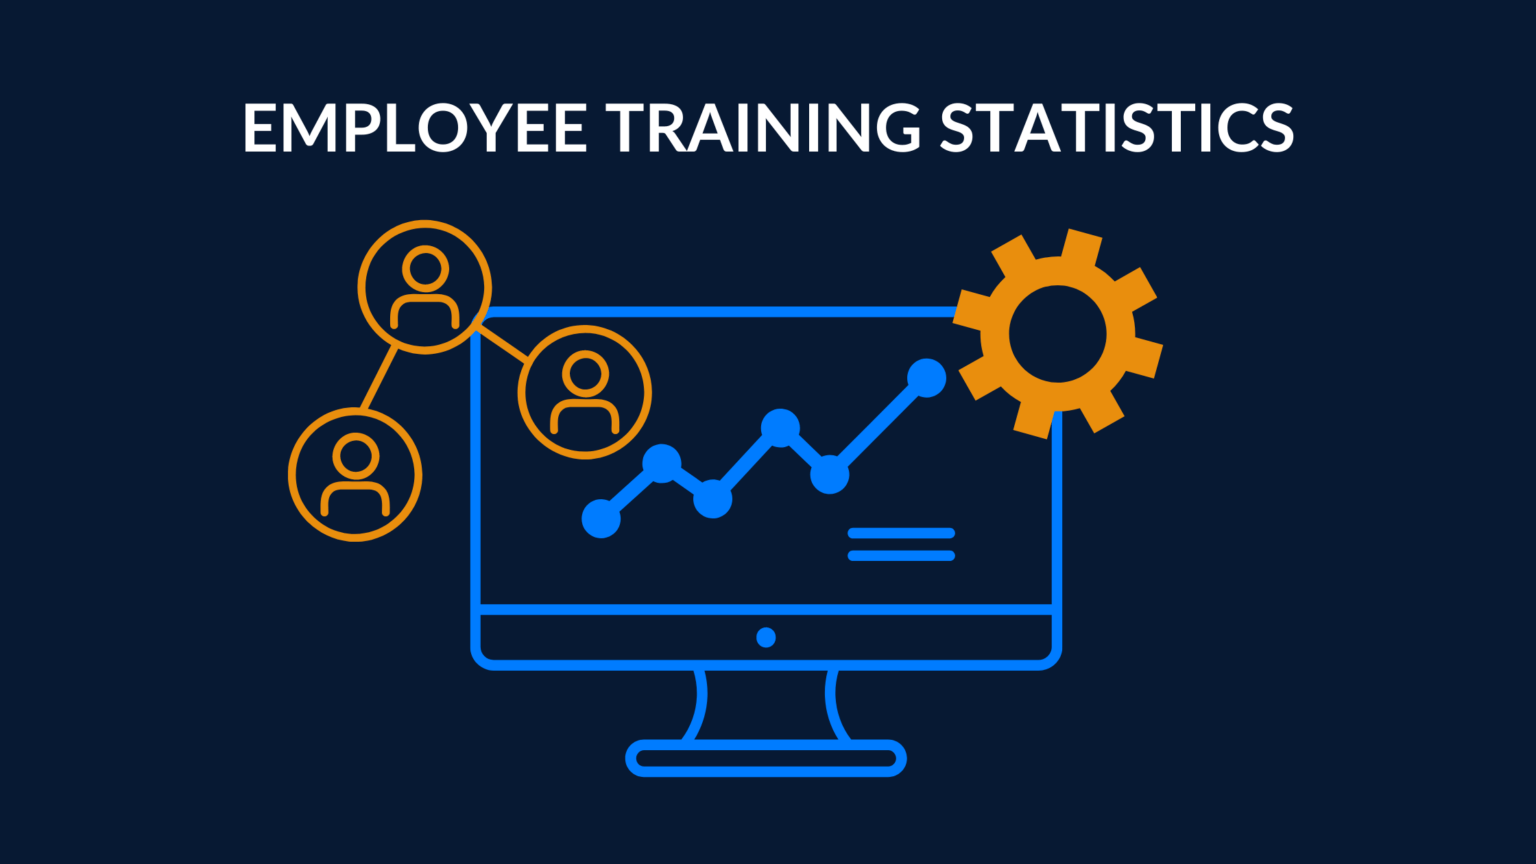 Employee Training Statistics For 2021 - eLearning Industry